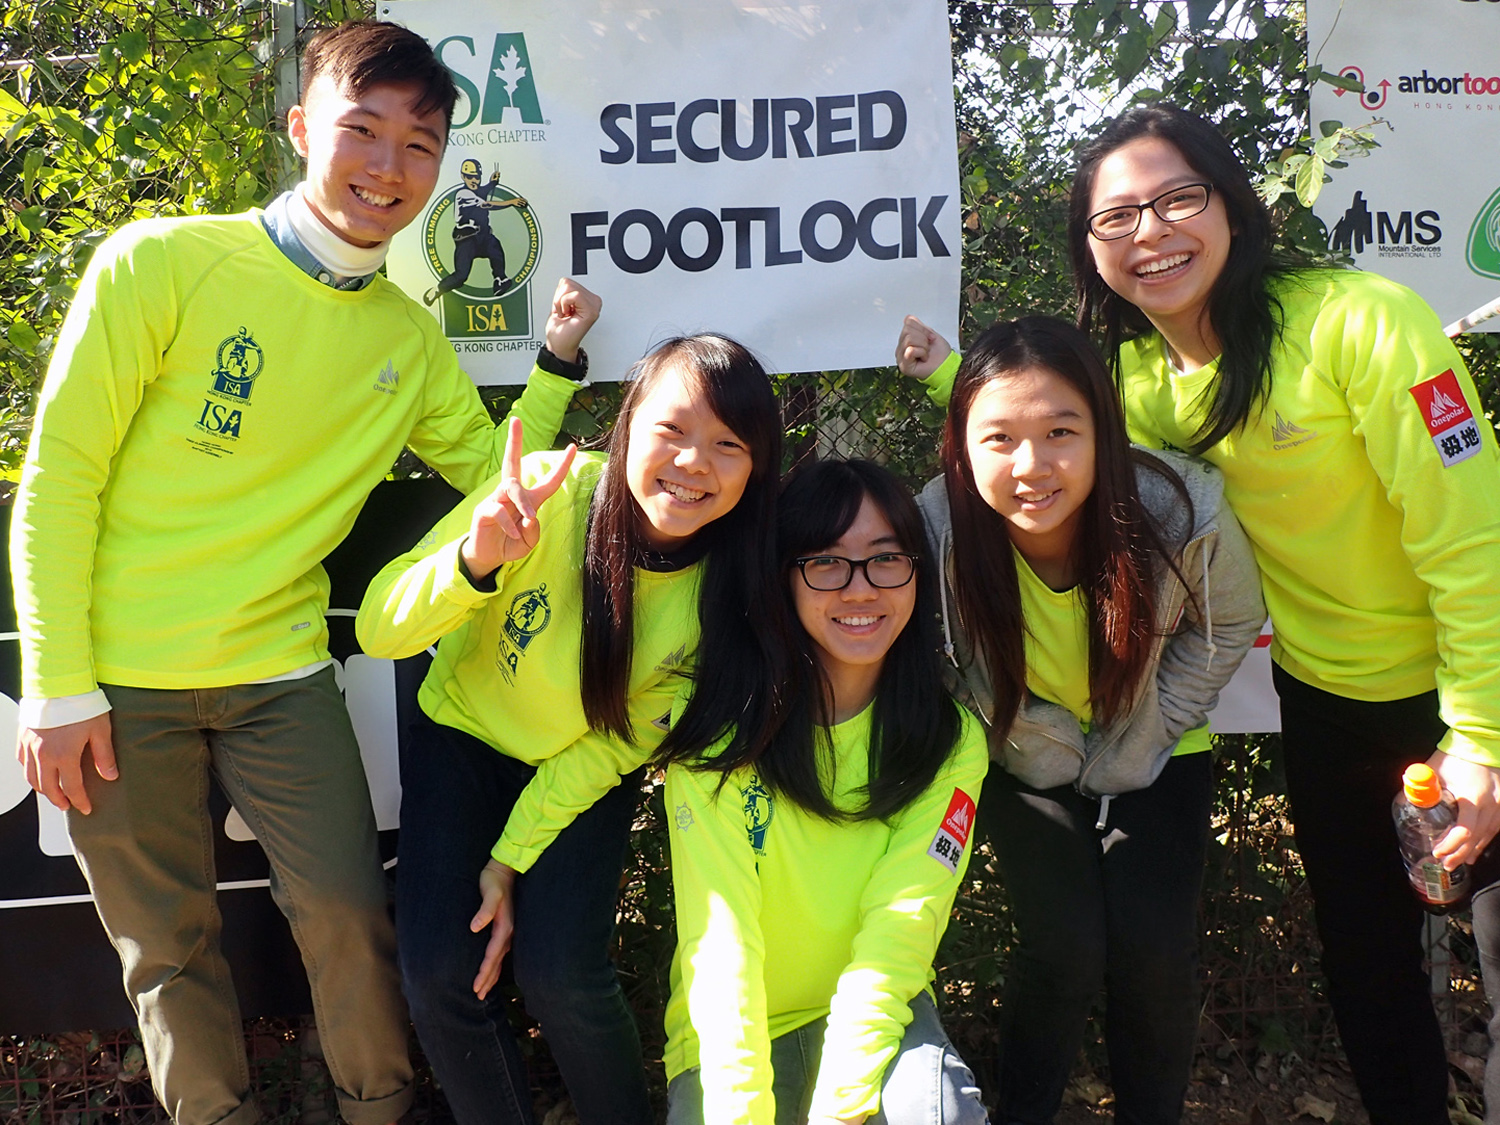 Students also assisted in the Secured Footlock event on that day.